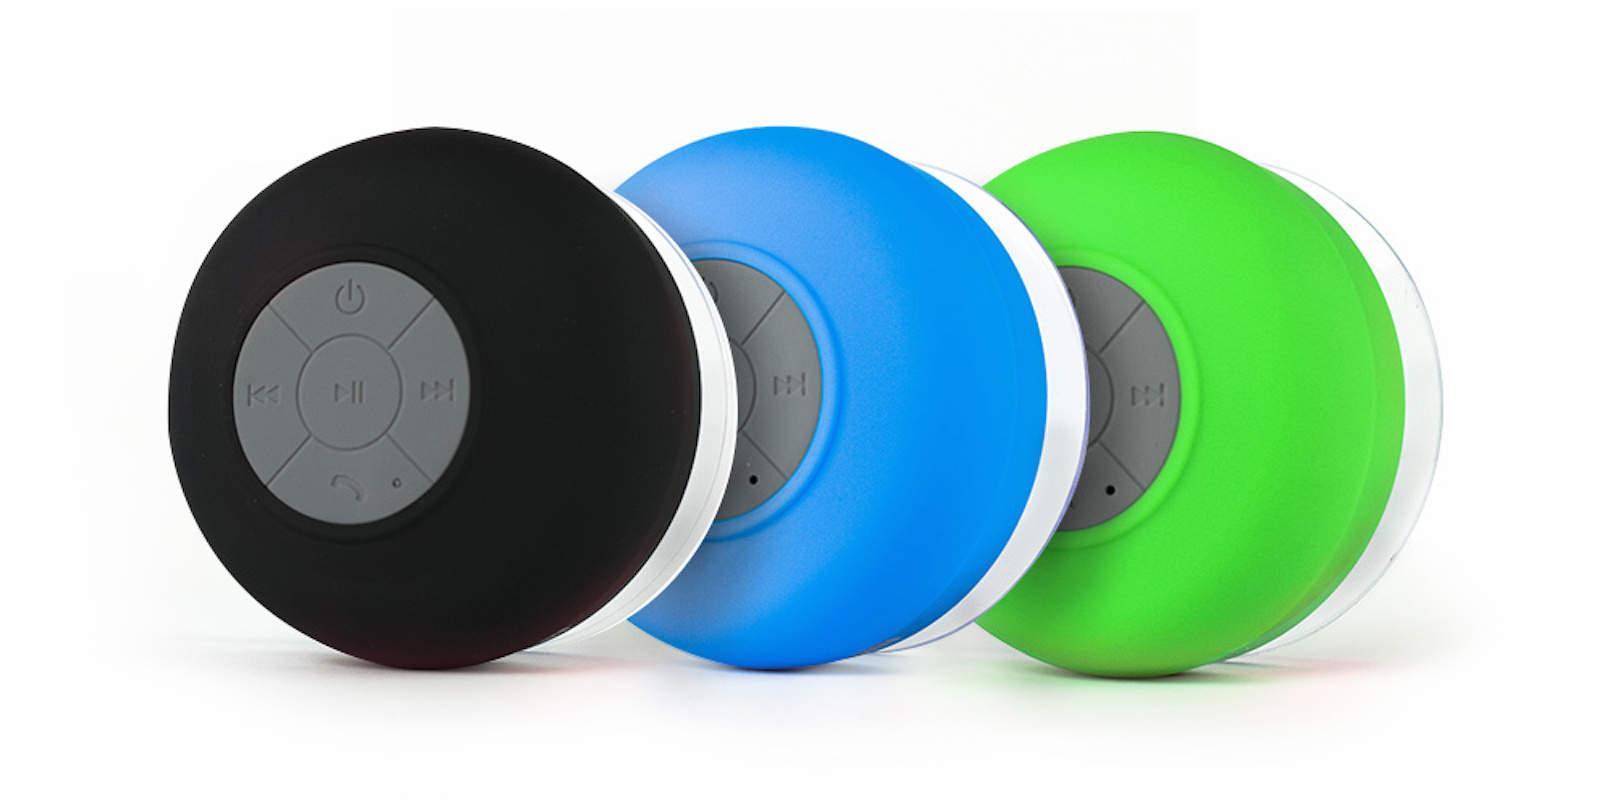 Bring your favorite tunes and shows into the shower with this waterproof Bluetooth speaker.